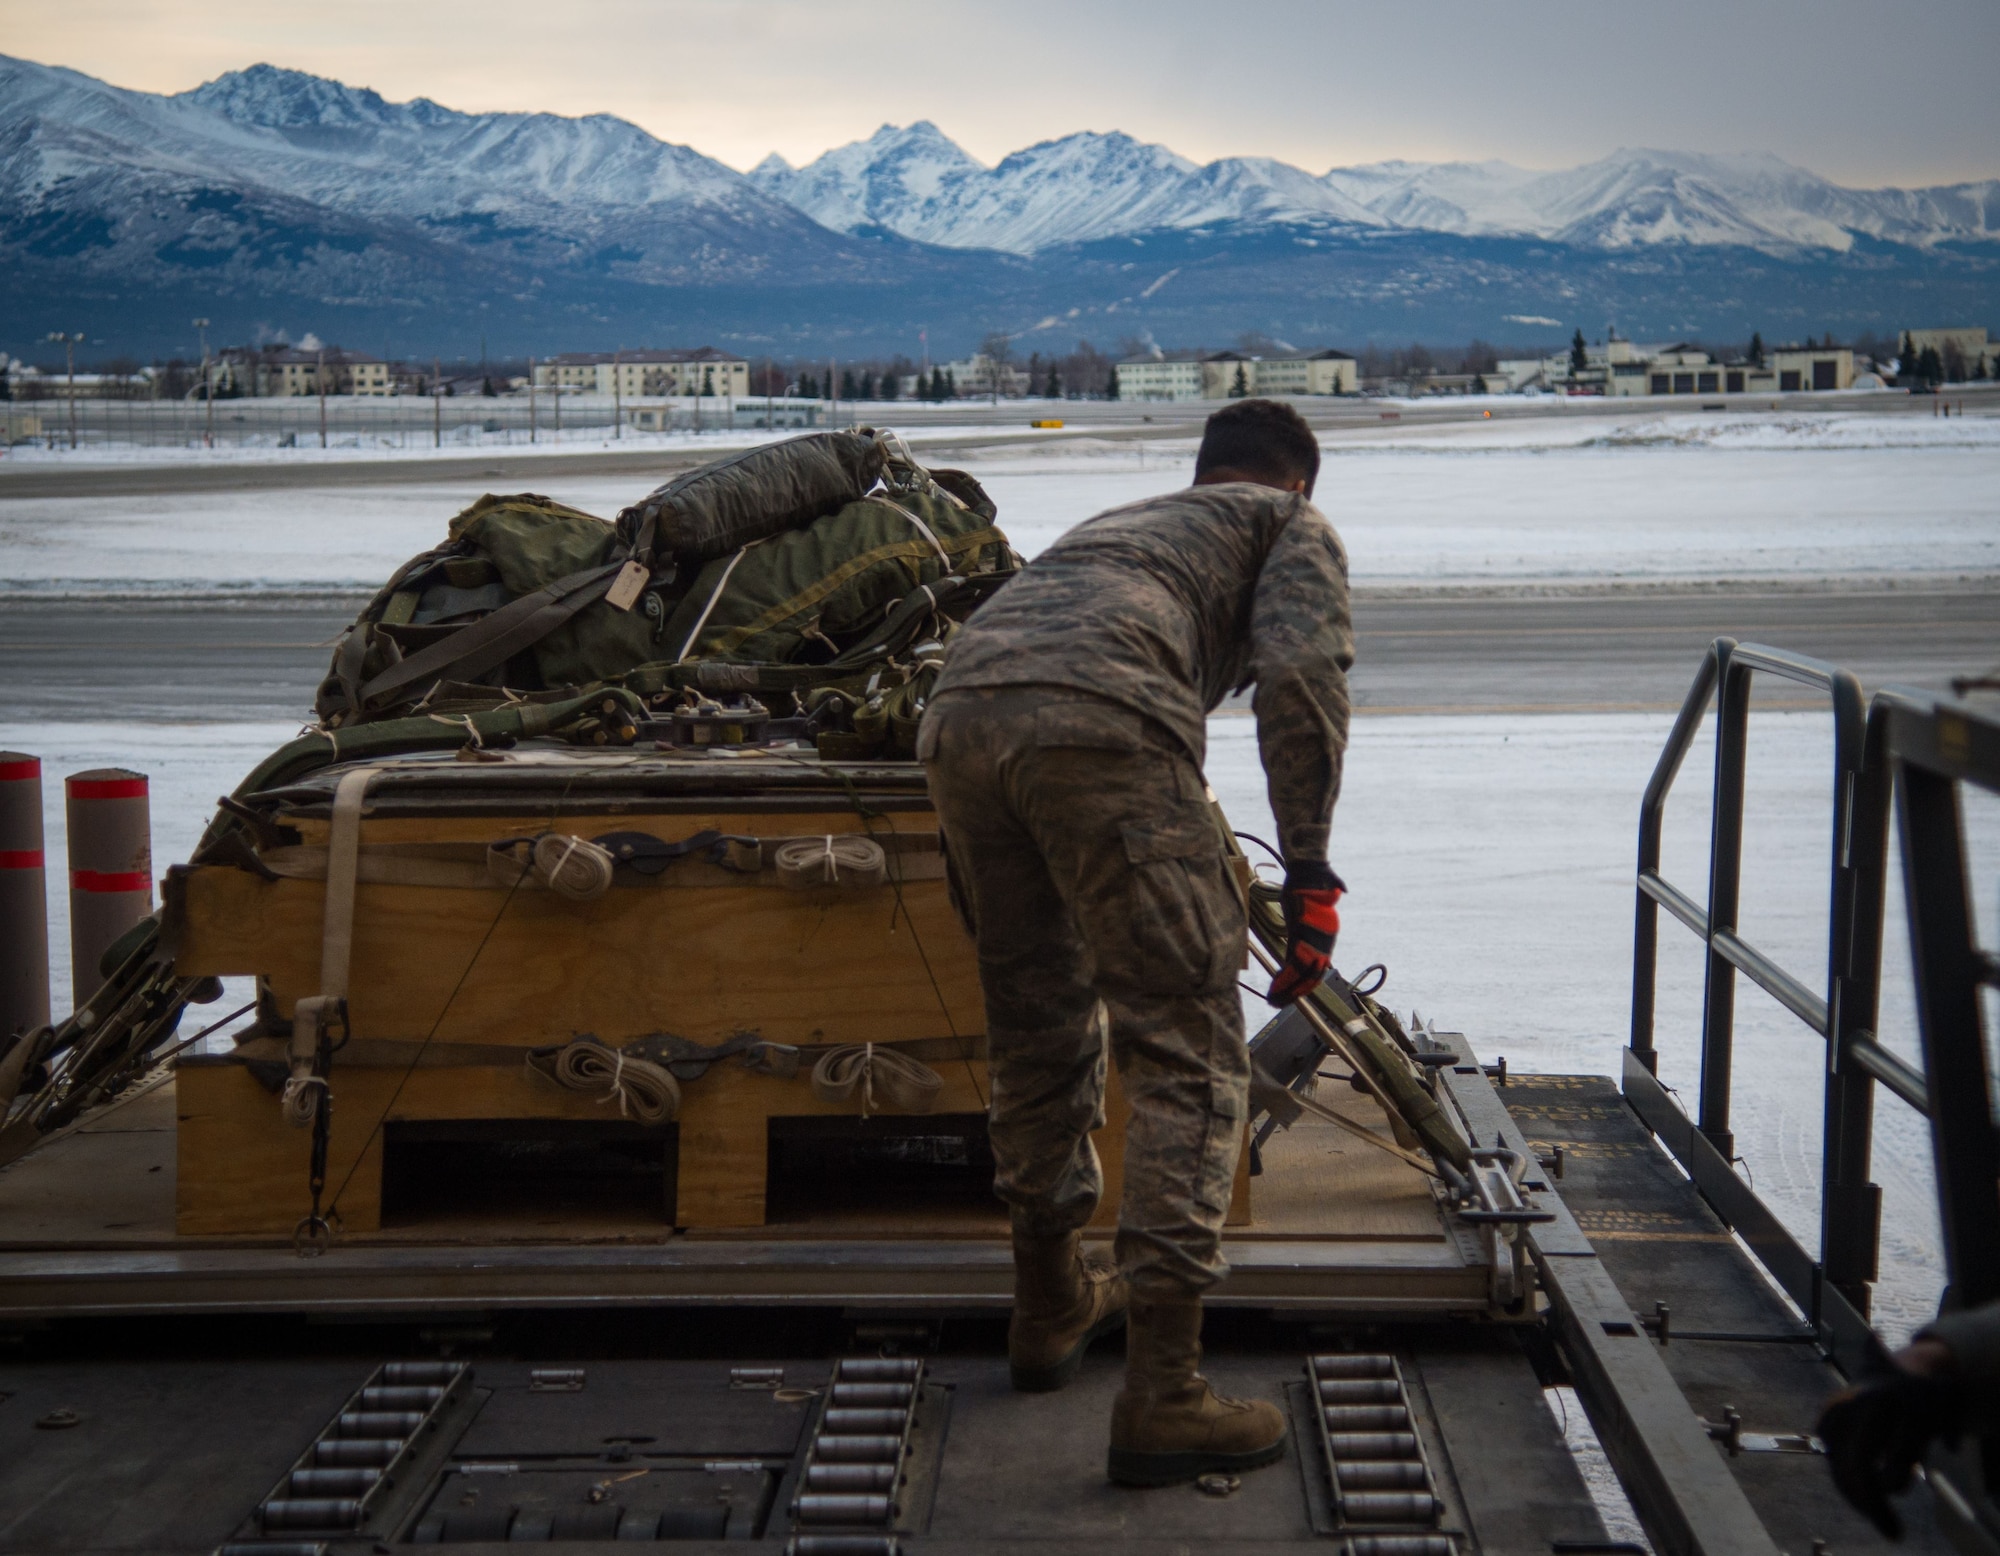 U.S. Air Force Senior Airman Roger Blumhorst, 773d Logistics Readiness Squadron combat mobility technician, loads a heavy cargo pallet onto a Halvorsen Loader at Joint Base Elmendorf-Richardson, Alaska, Jan. 18, 2018. The Halvorsen Loader is a rapidly deployable, high-reach mechanized aircraft loader that can transport and lift up to 25,000 pounds of cargo and load it onto military and civilian aircraft. JBER’s combat mobility flight is the largest in PACAF, providing C-130 Hercules and C-17 Globemaster III unilateral airdrop and airland training for two wings and three squadrons while at home station, as well as all of the airdrop training to Red Flag Alaska.